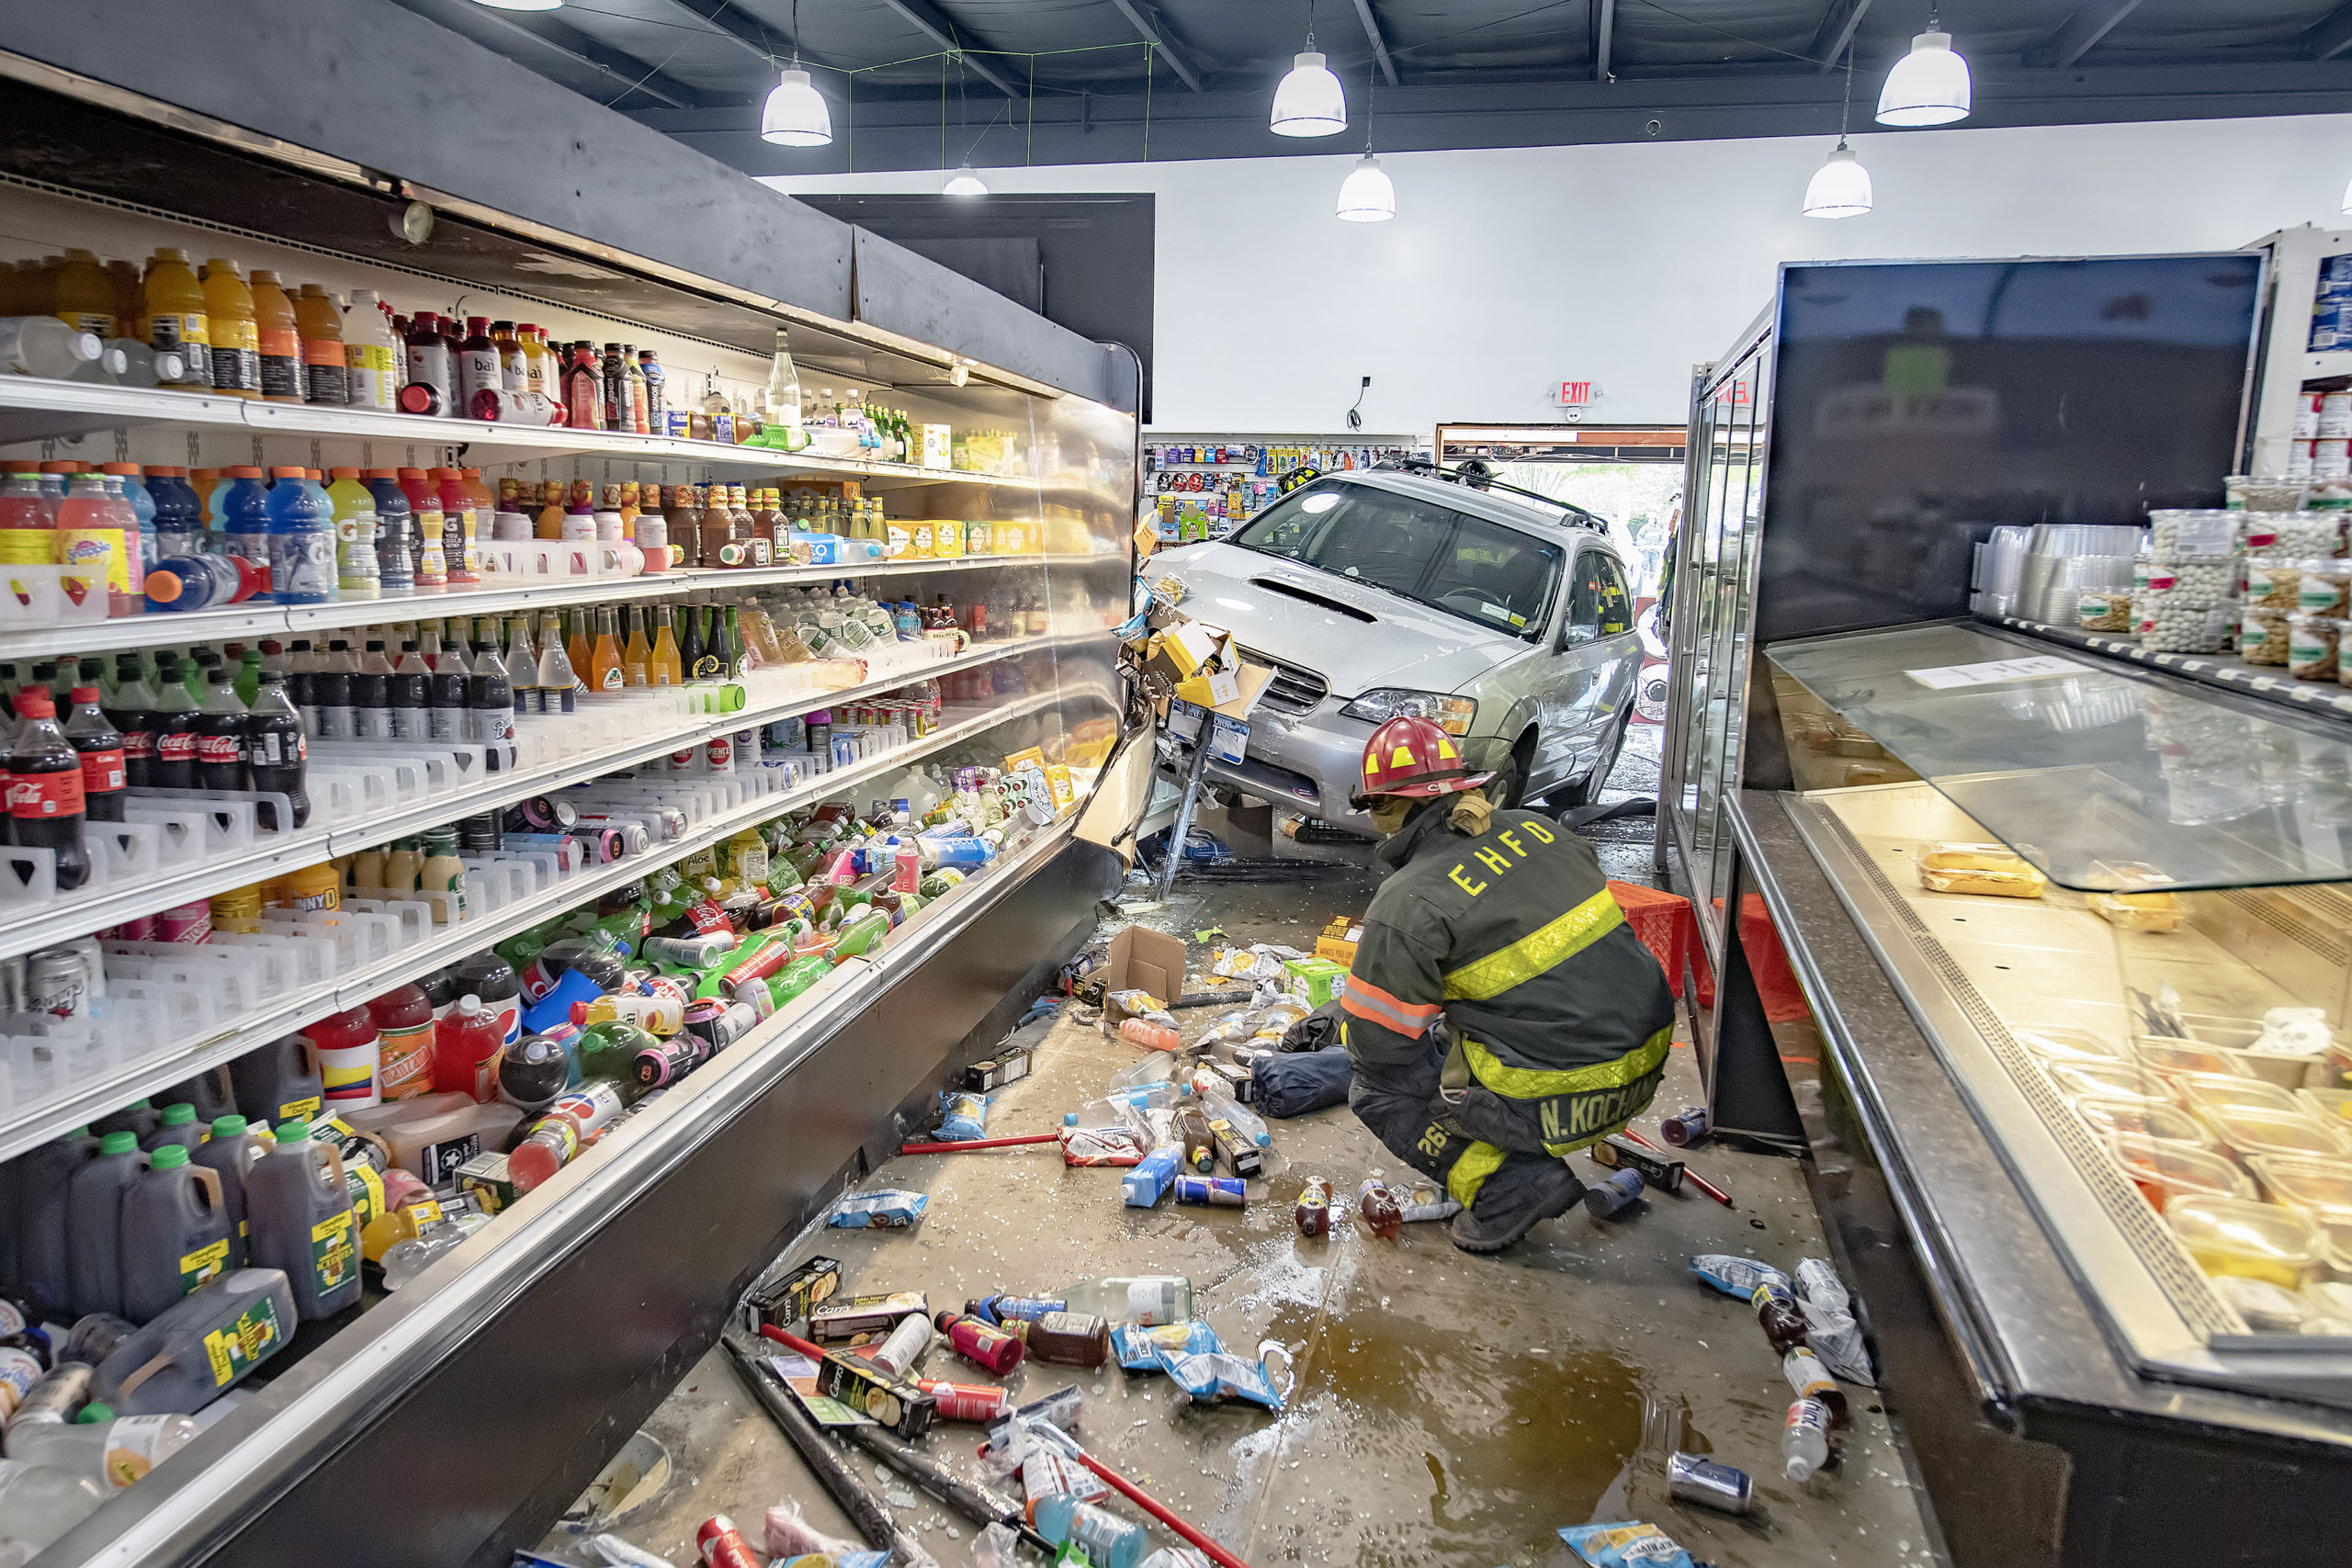 Two people suffered minor injuries when an car smashed through the front of the East Hampton Market on Race Lane. 